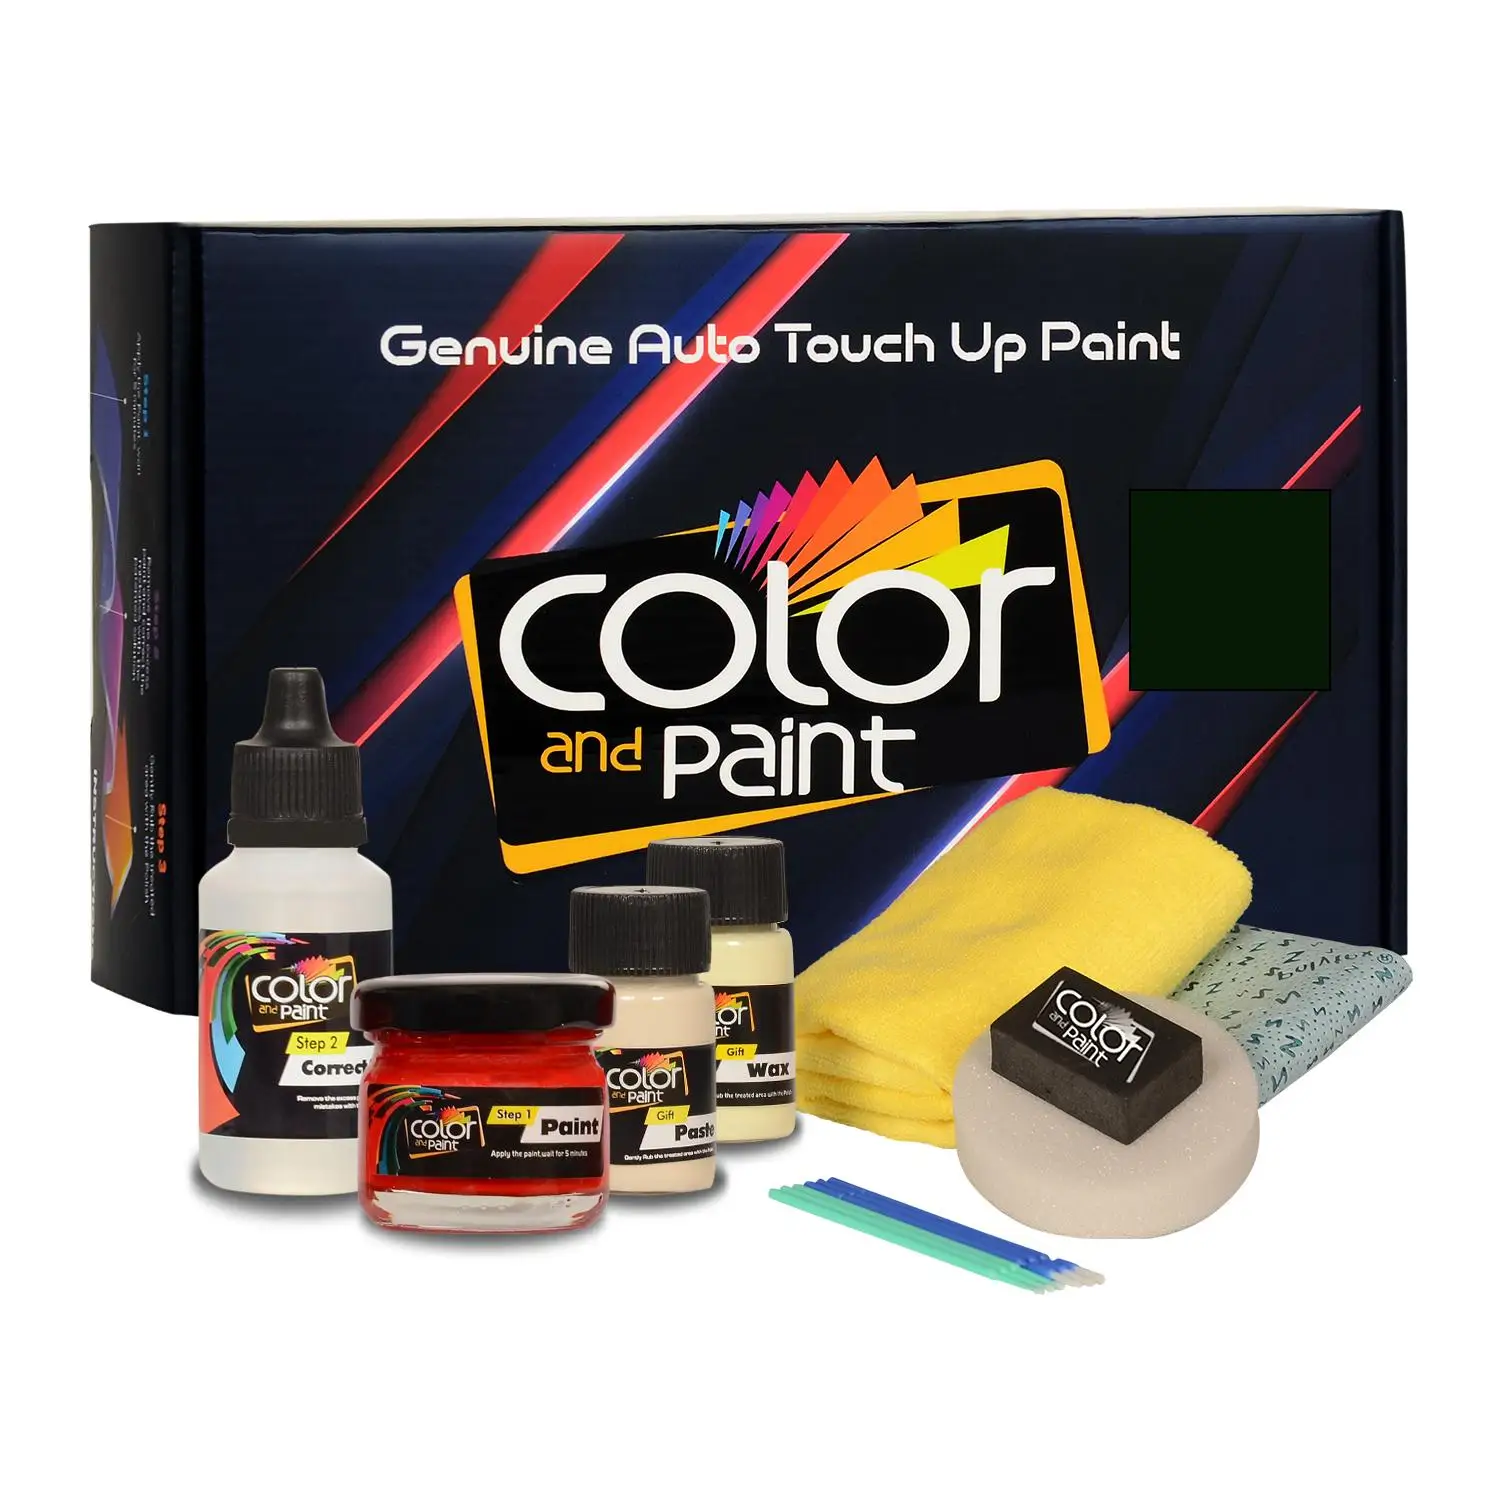 

Color and Paint compatible with Fiat Automotive Touch Up Paint - VERDE RAL 6002 - 556 - Basic Care